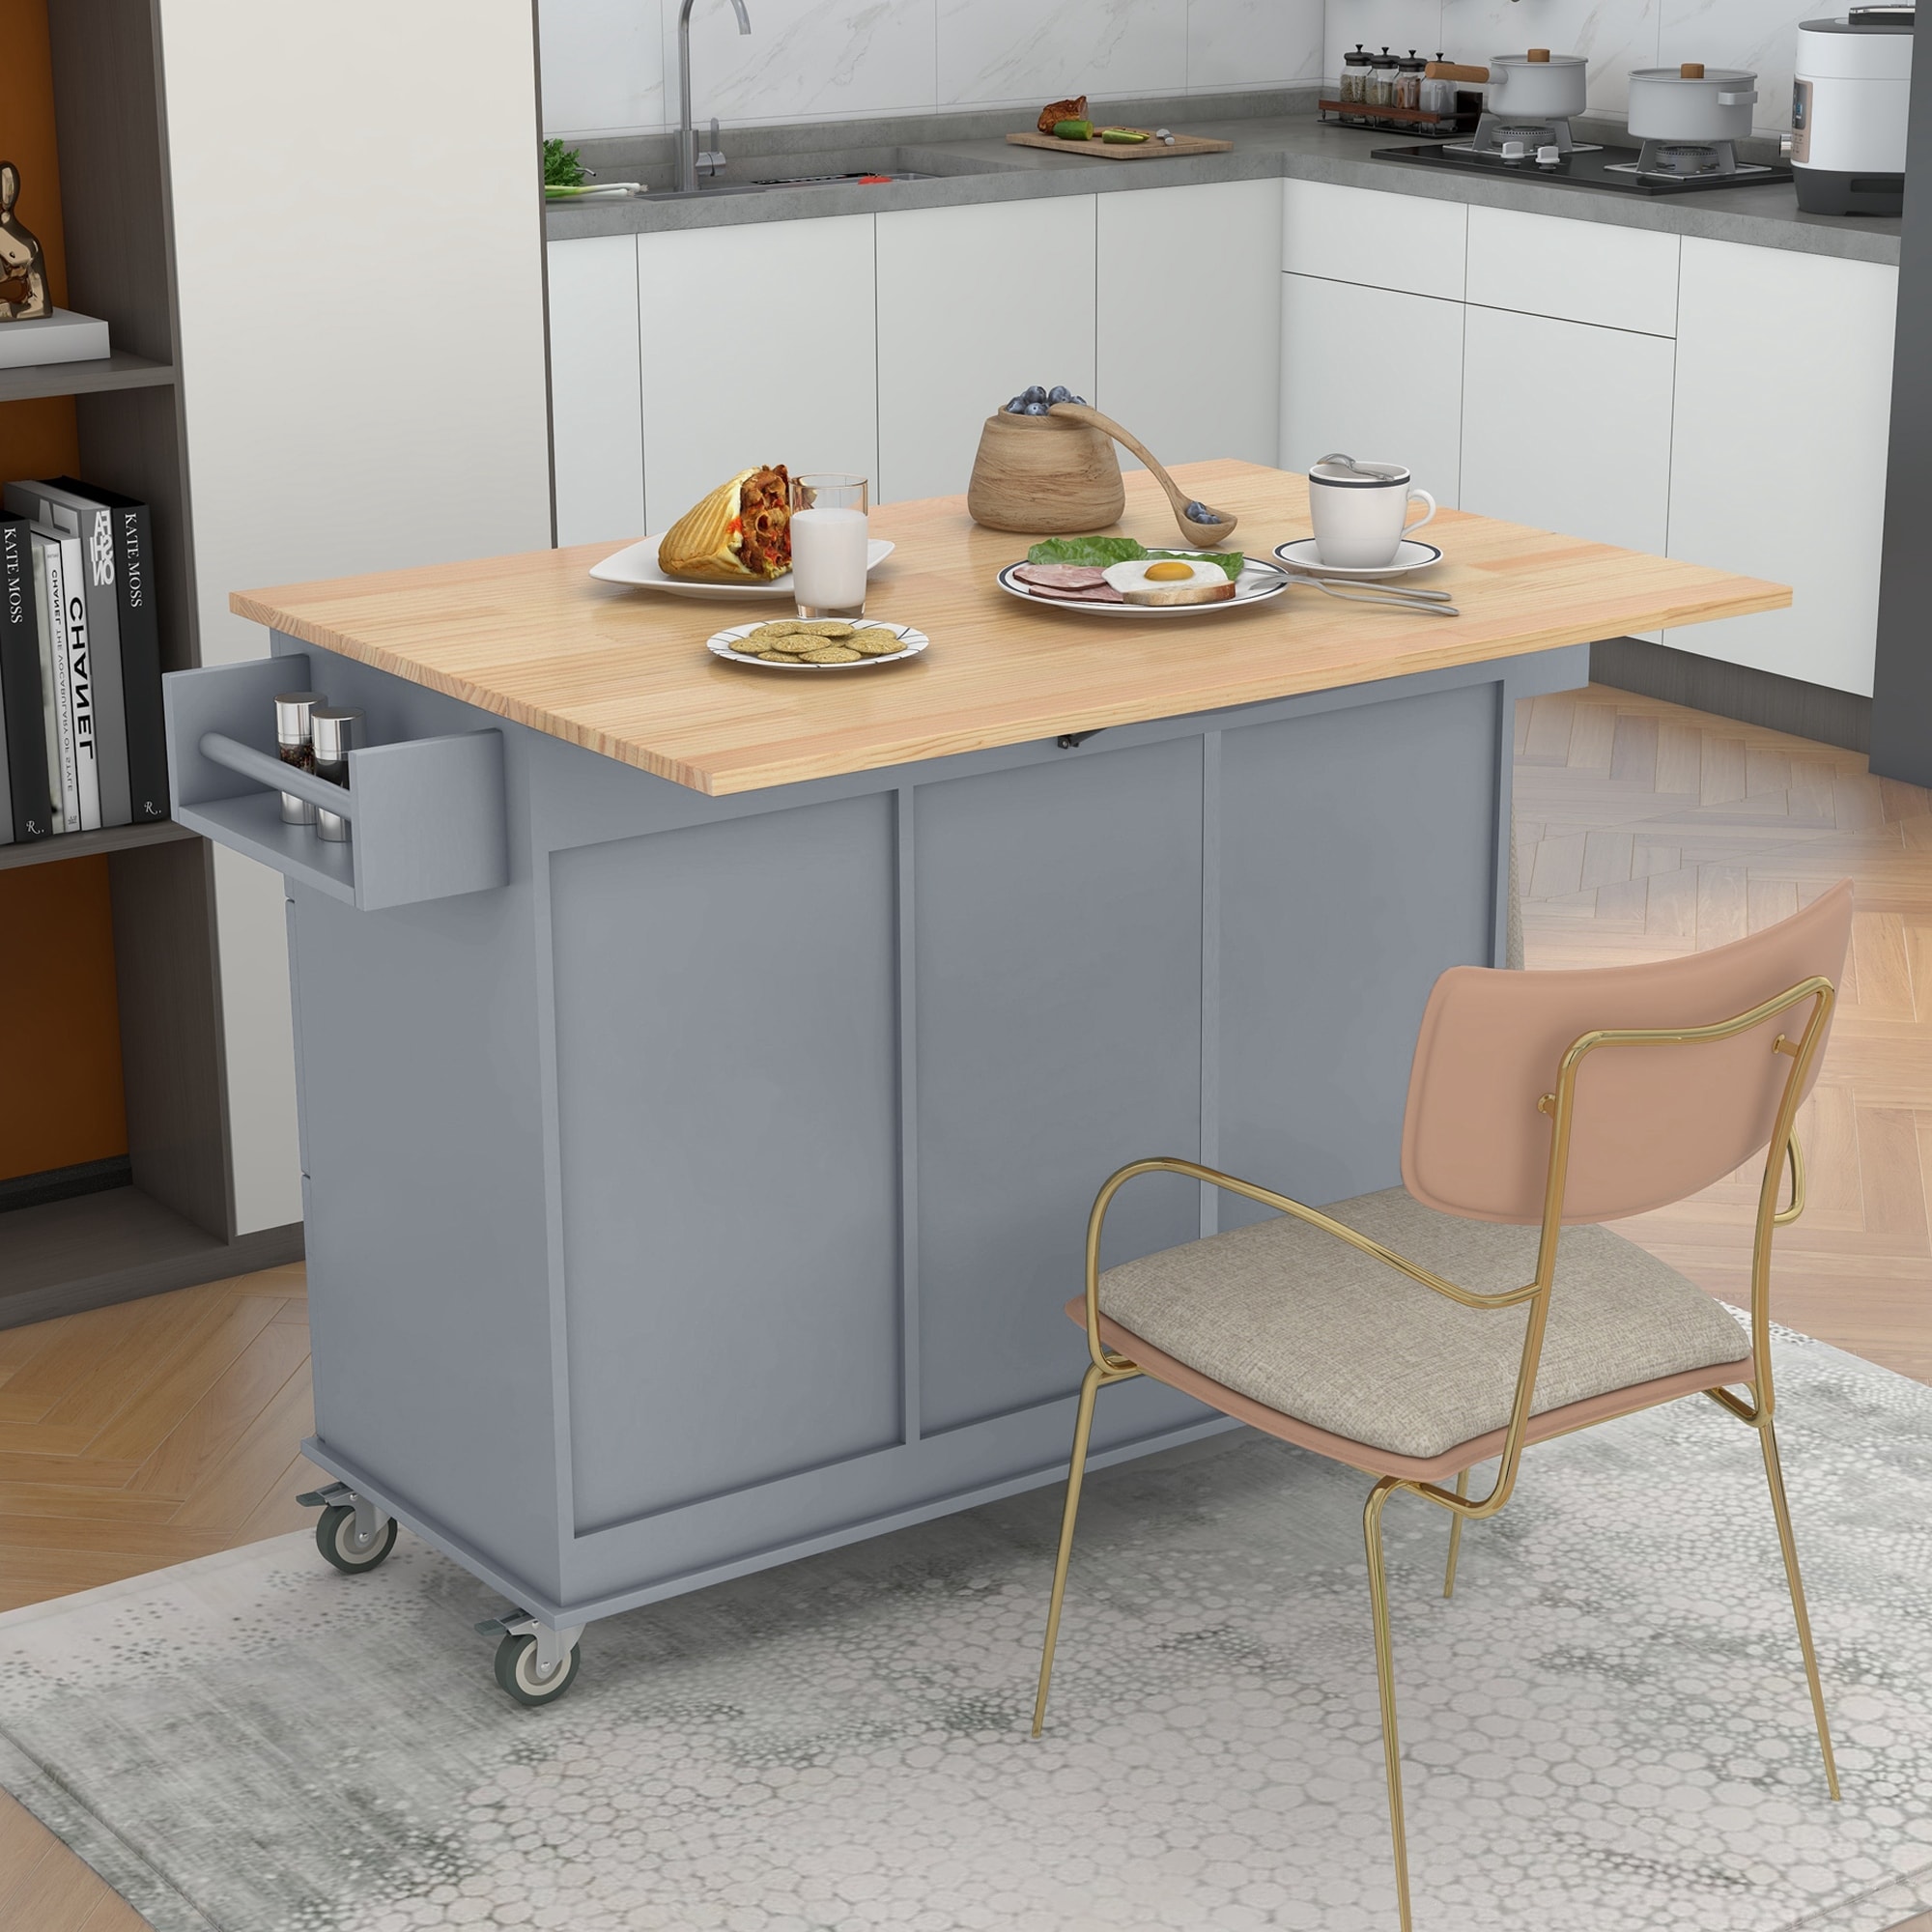 Portable Kitchen Islands and Carts - Bed Bath & Beyond